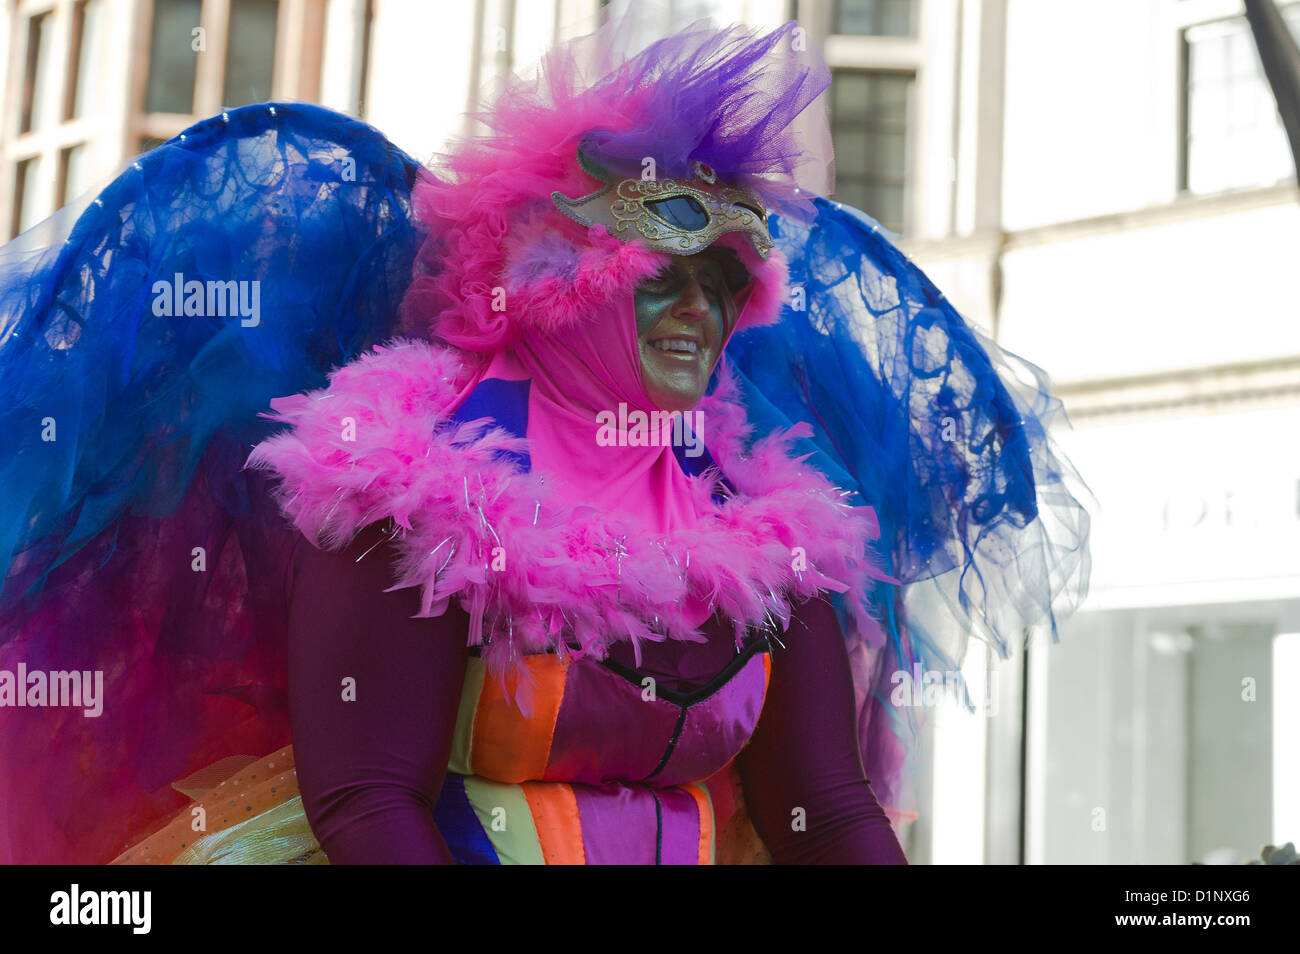 The 2013 New Years Day Parade. LONDON. UK. 01/01/2013. © Peter Webb/Alamy. All Rights Asserted And Reserved. No part of this photo to be stored, reproduced, manipulated or transmitted by any means without permission. Photo credit: Peter Webb/Alamy Stock Photo